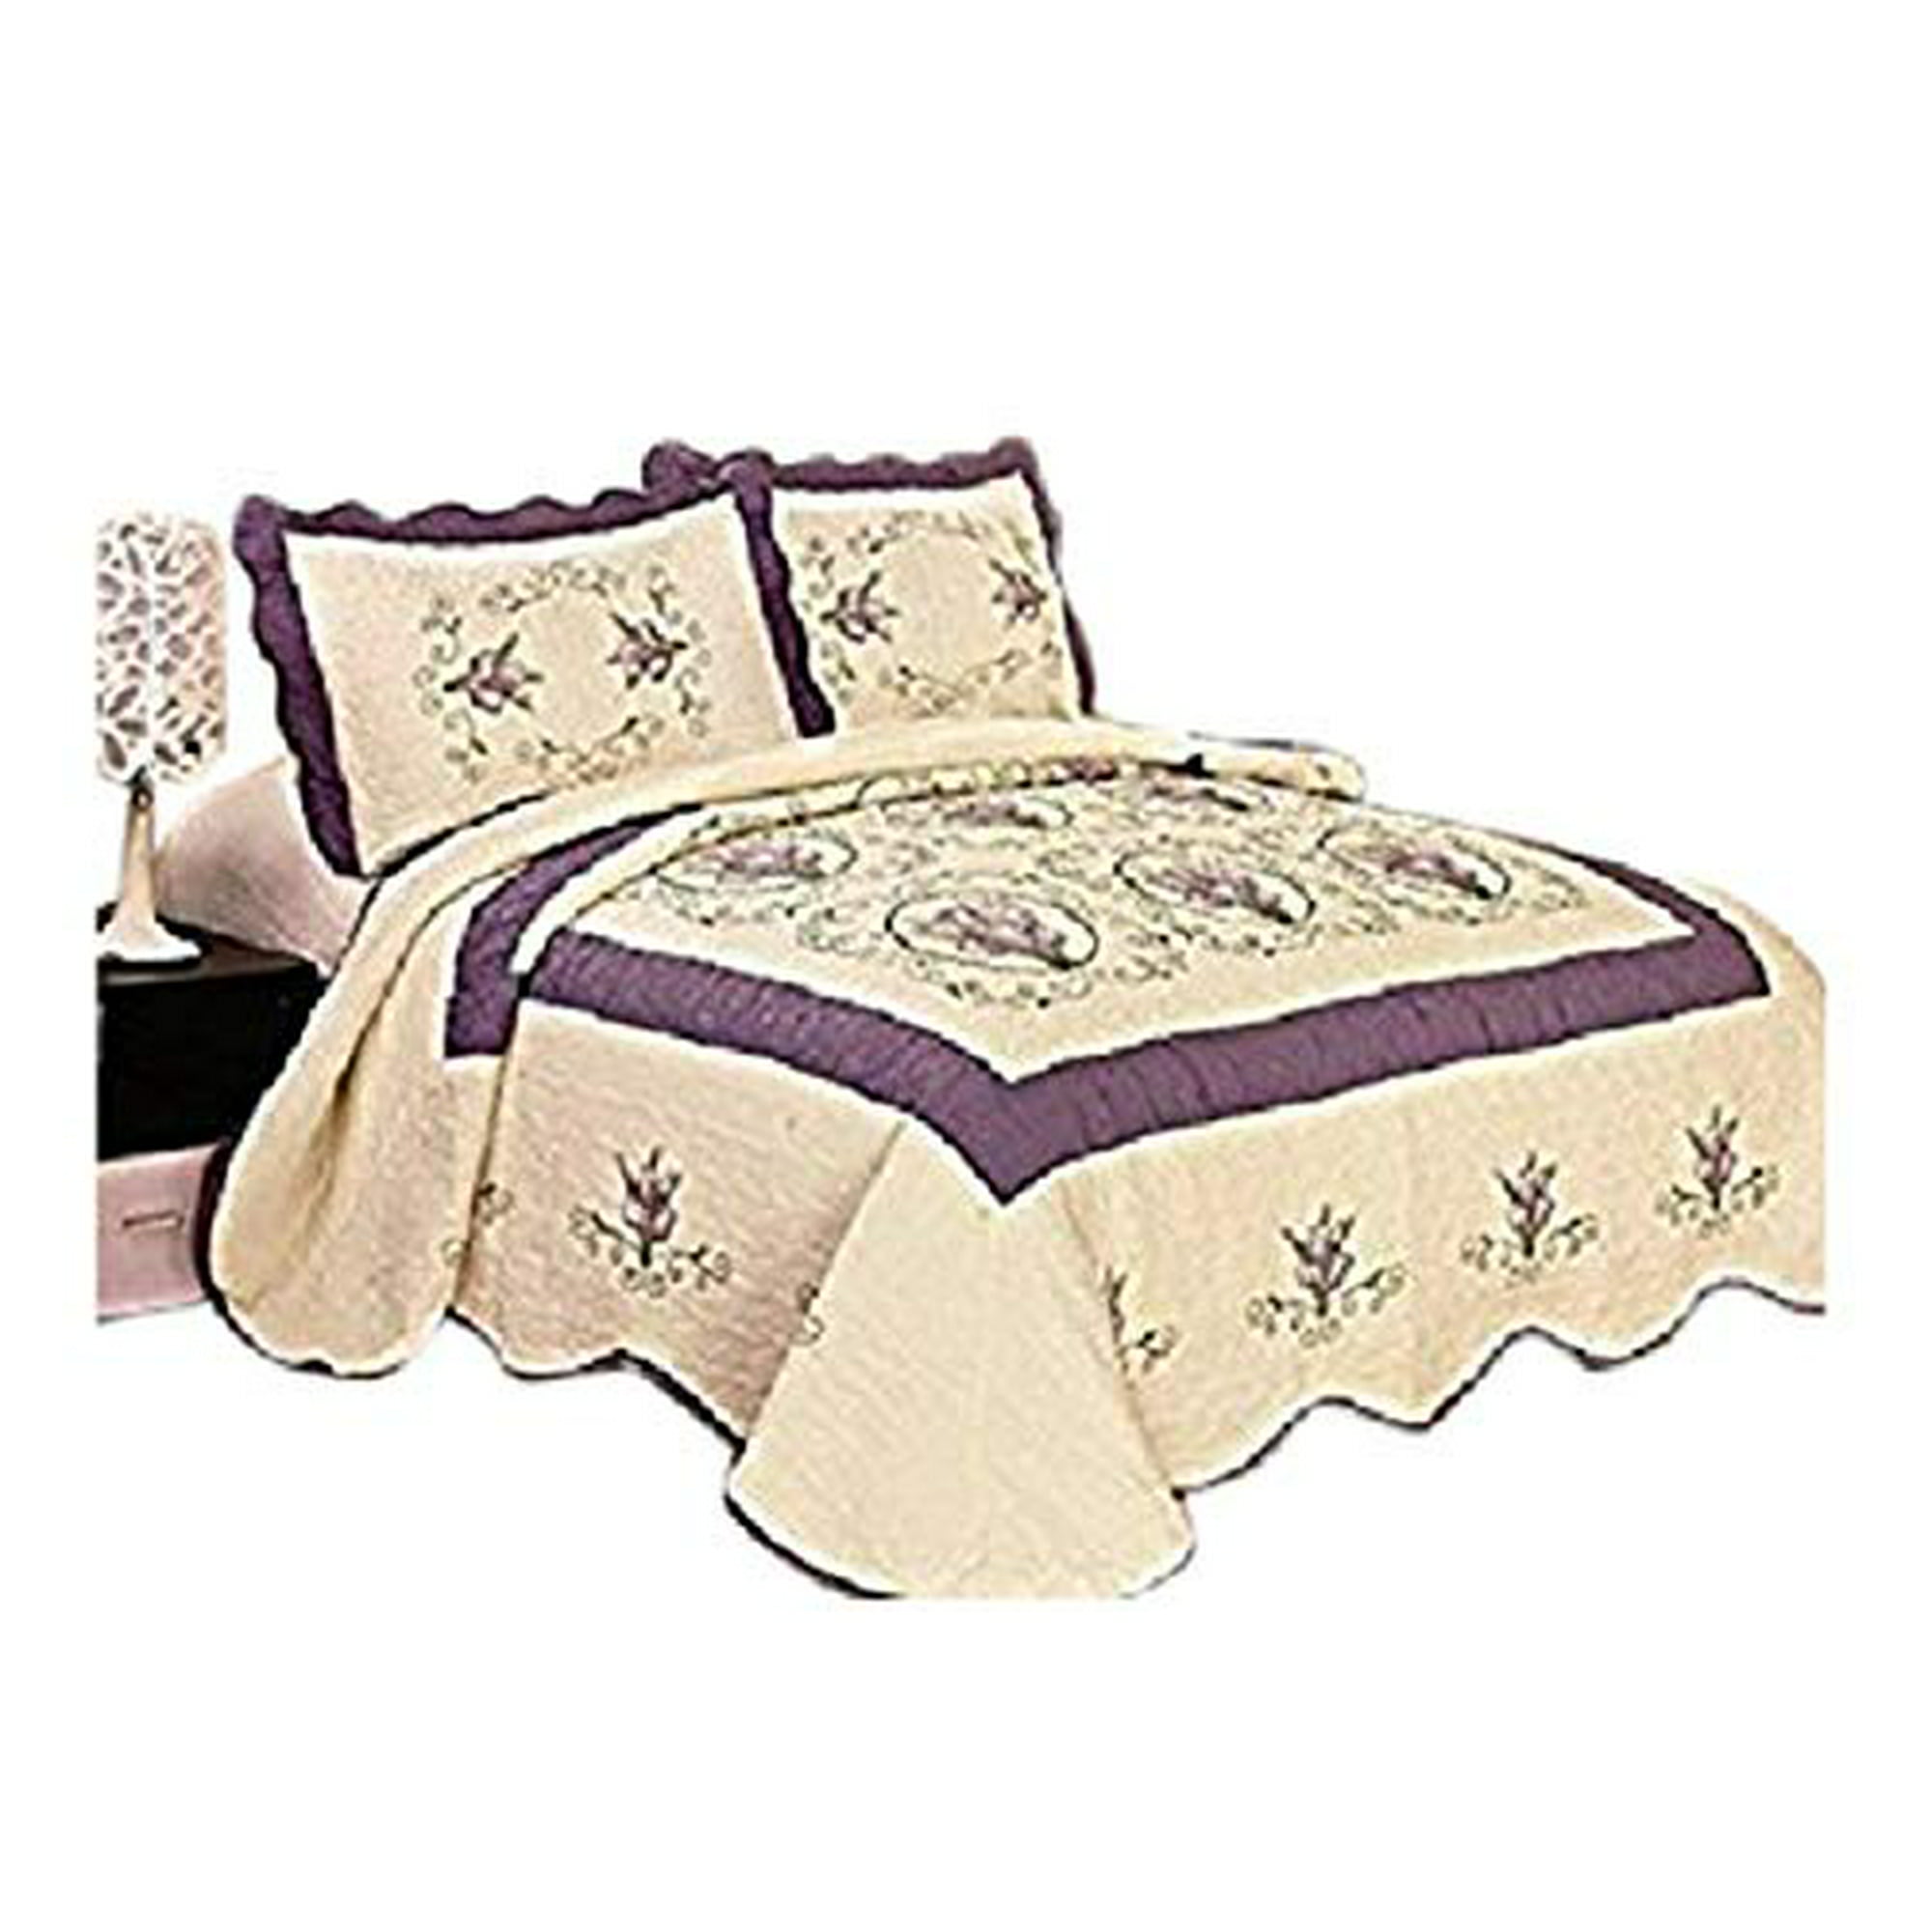 Finehome 3pcs Fully Quilted Embroidery Quilts Bedspread Bed